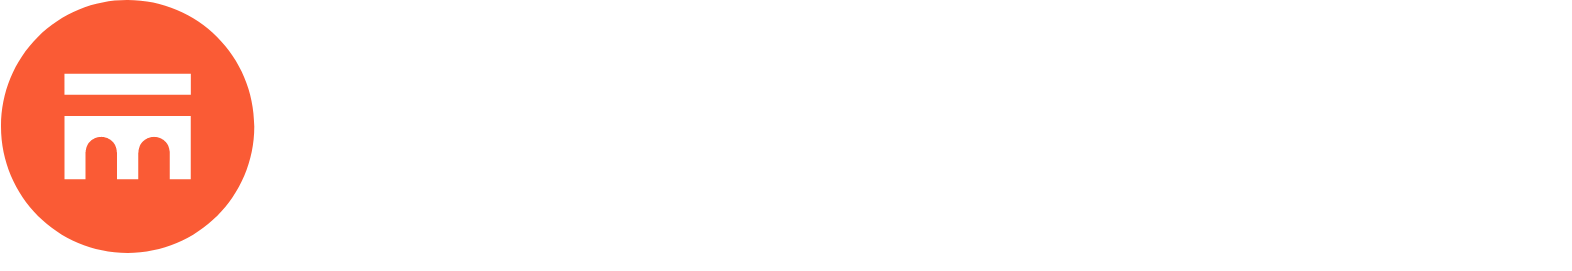 Swissquote logo large for dark backgrounds (transparent PNG)